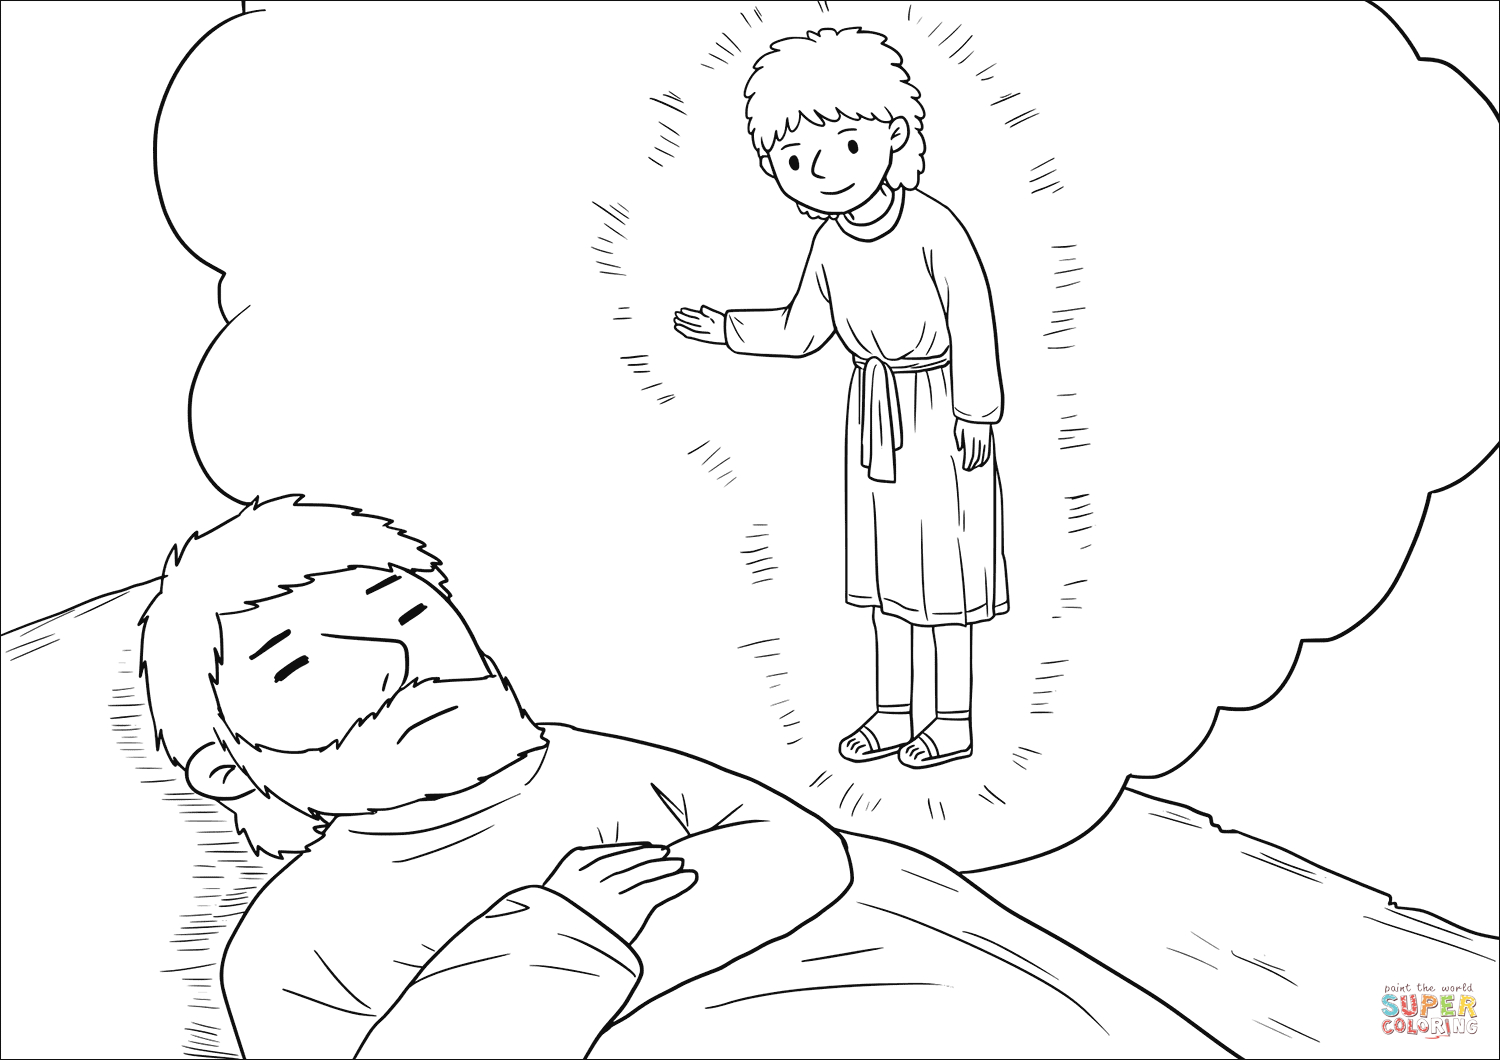 Angel Visits Joseph Coloring Page An Angel Of The Lord Appeared To Joseph In A Dream Coloring Page